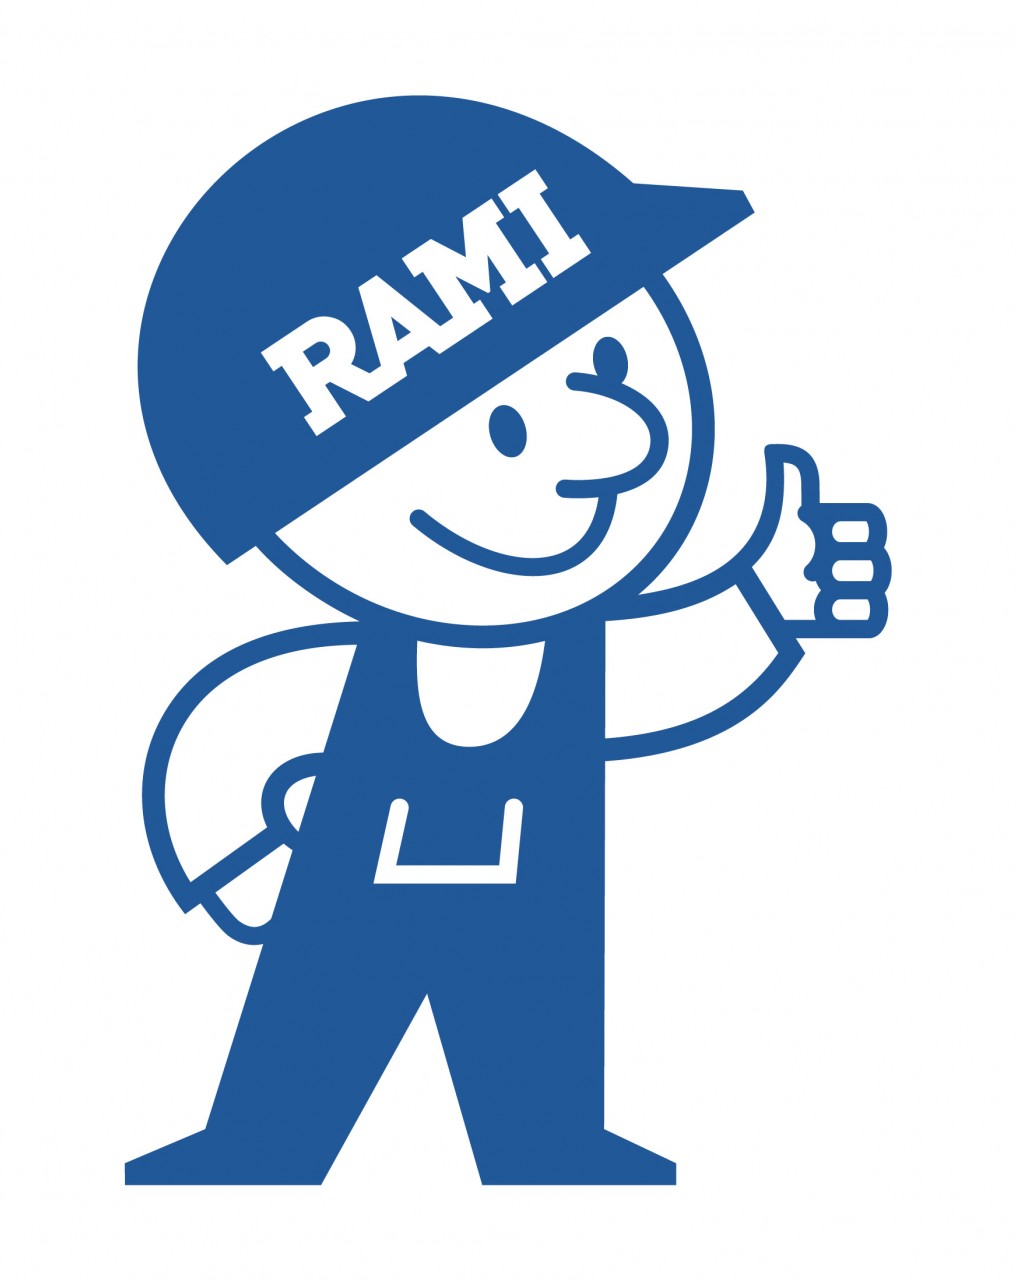 Rami, a character for Ramirent. Provider of rental equipment.